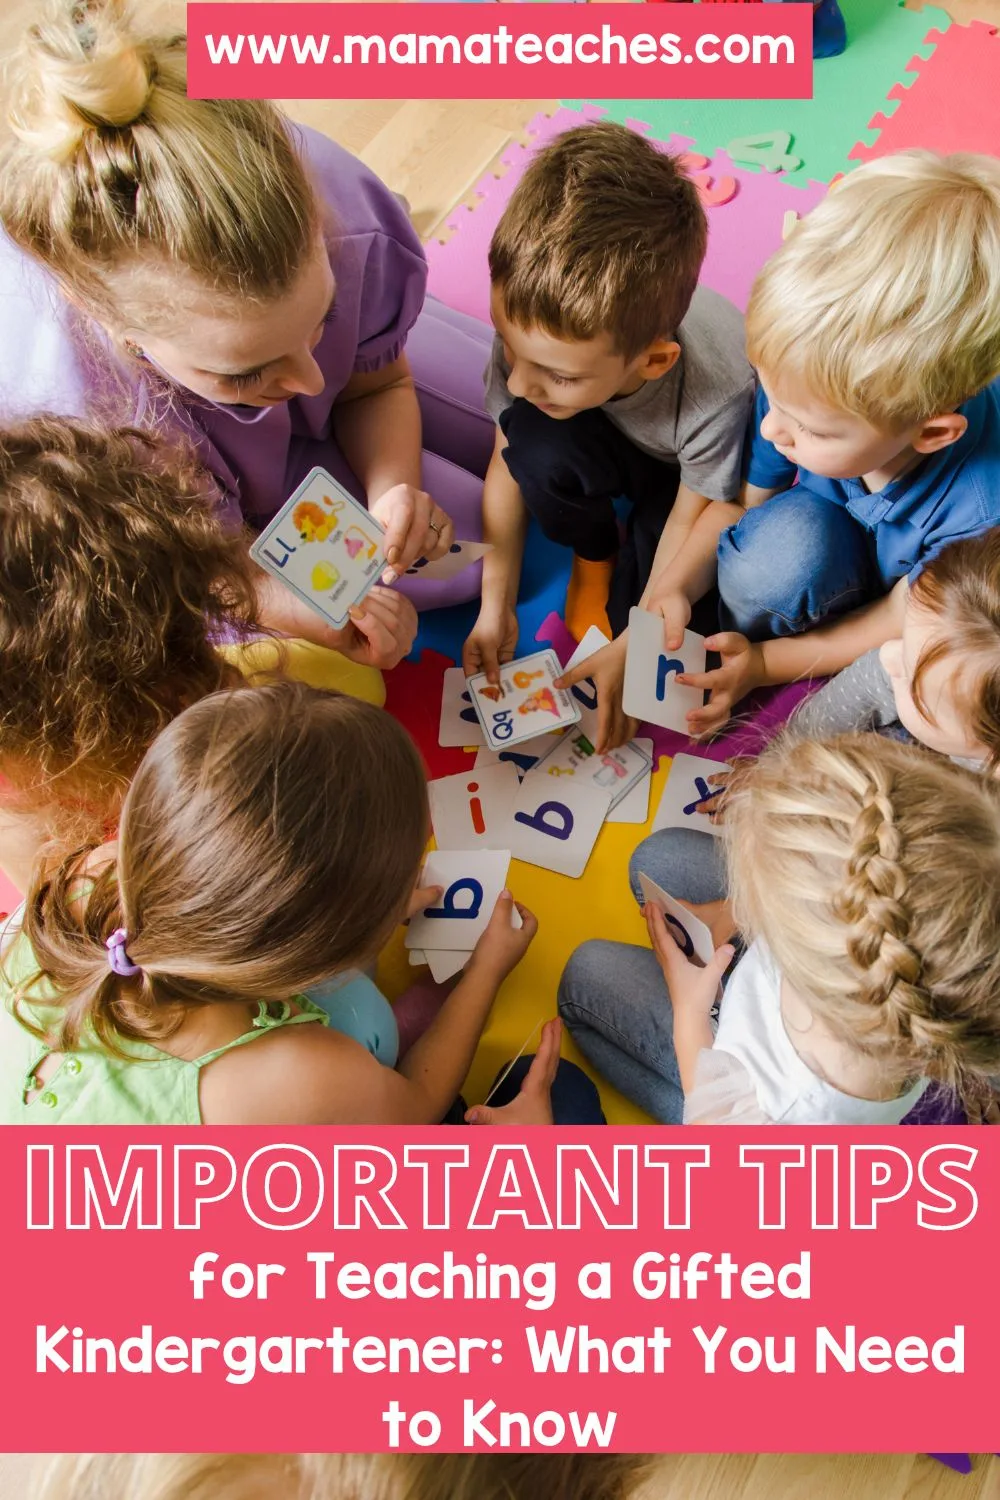 Important Tips for Teaching a Gifted Kindergartener What You Need to Know